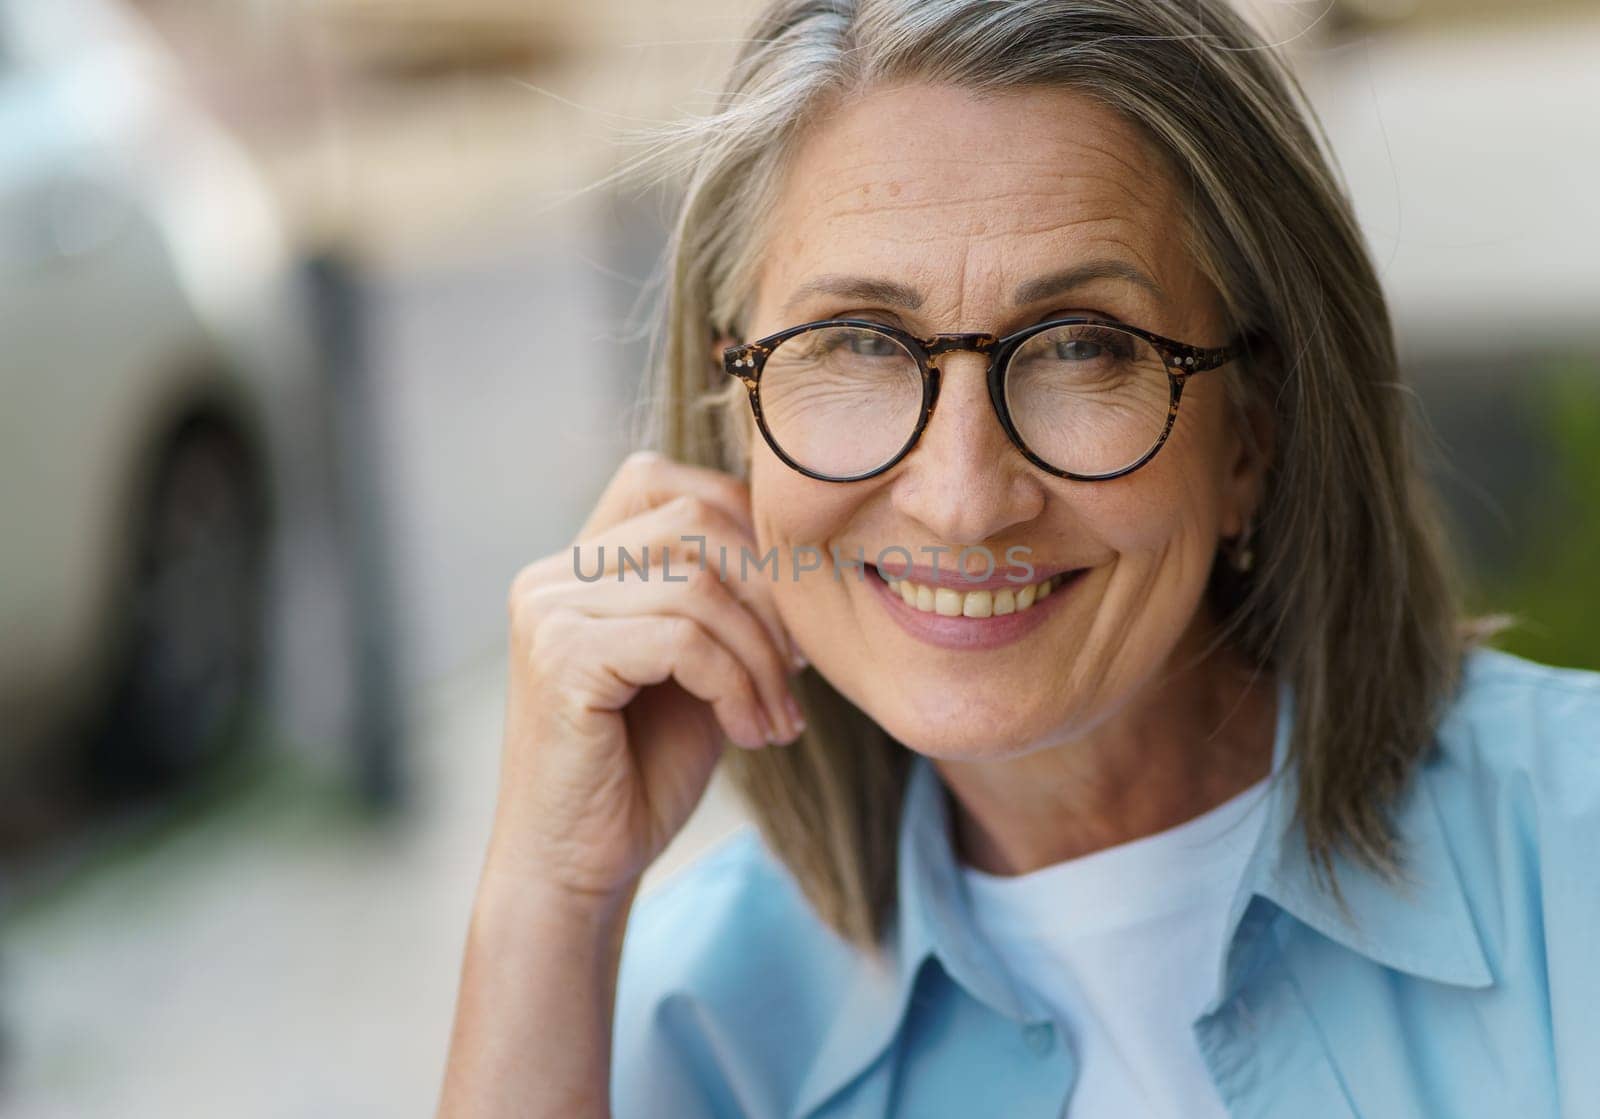 An elderly woman wearing glasses and a blue shirt.